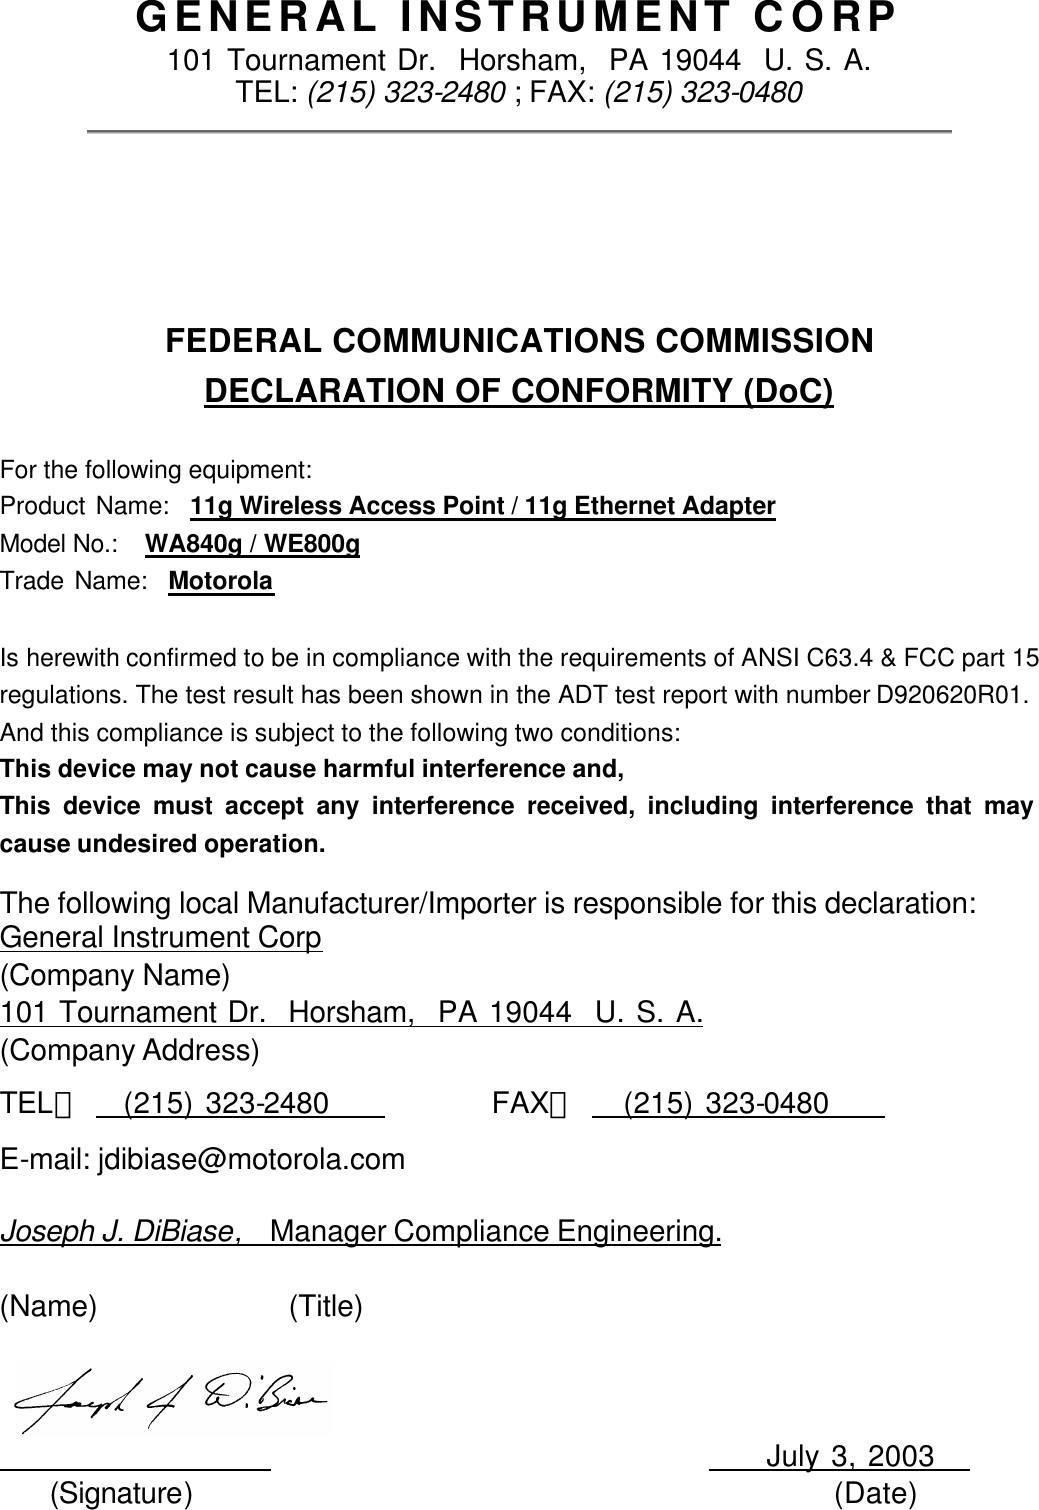  GENERAL INSTRUMENT CORP 101 Tournament Dr.  Horsham,  PA 19044  U. S. A. TEL: (215) 323-2480 ; FAX: (215) 323-0480  FEDERAL COMMUNICATIONS COMMISSION DECLARATION OF CONFORMITY (DoC)  For the following equipment: Product Name:  11g Wireless Access Point / 11g Ethernet Adapter Model No.:   WA840g / WE800g Trade Name:  Motorola  Is herewith confirmed to be in compliance with the requirements of ANSI C63.4 &amp; FCC part 15 regulations. The test result has been shown in the ADT test report with number D920620R01.  And this compliance is subject to the following two conditions: This device may not cause harmful interference and, This device must accept any interference received, including interference that may cause undesired operation. The following local Manufacturer/Importer is responsible for this declaration: General Instrument Corp (Company Name) 101 Tournament Dr.  Horsham,  PA 19044  U. S. A. (Company Address) TEL：     (215) 323-2480           FAX：     (215) 323-0480         E-mail: jdibiase@motorola.com    Joseph J. DiBiase,  Manager Compliance Engineering.  (Name)              (Title)                                               July 3, 2003    (Signature)                                             (Date) 